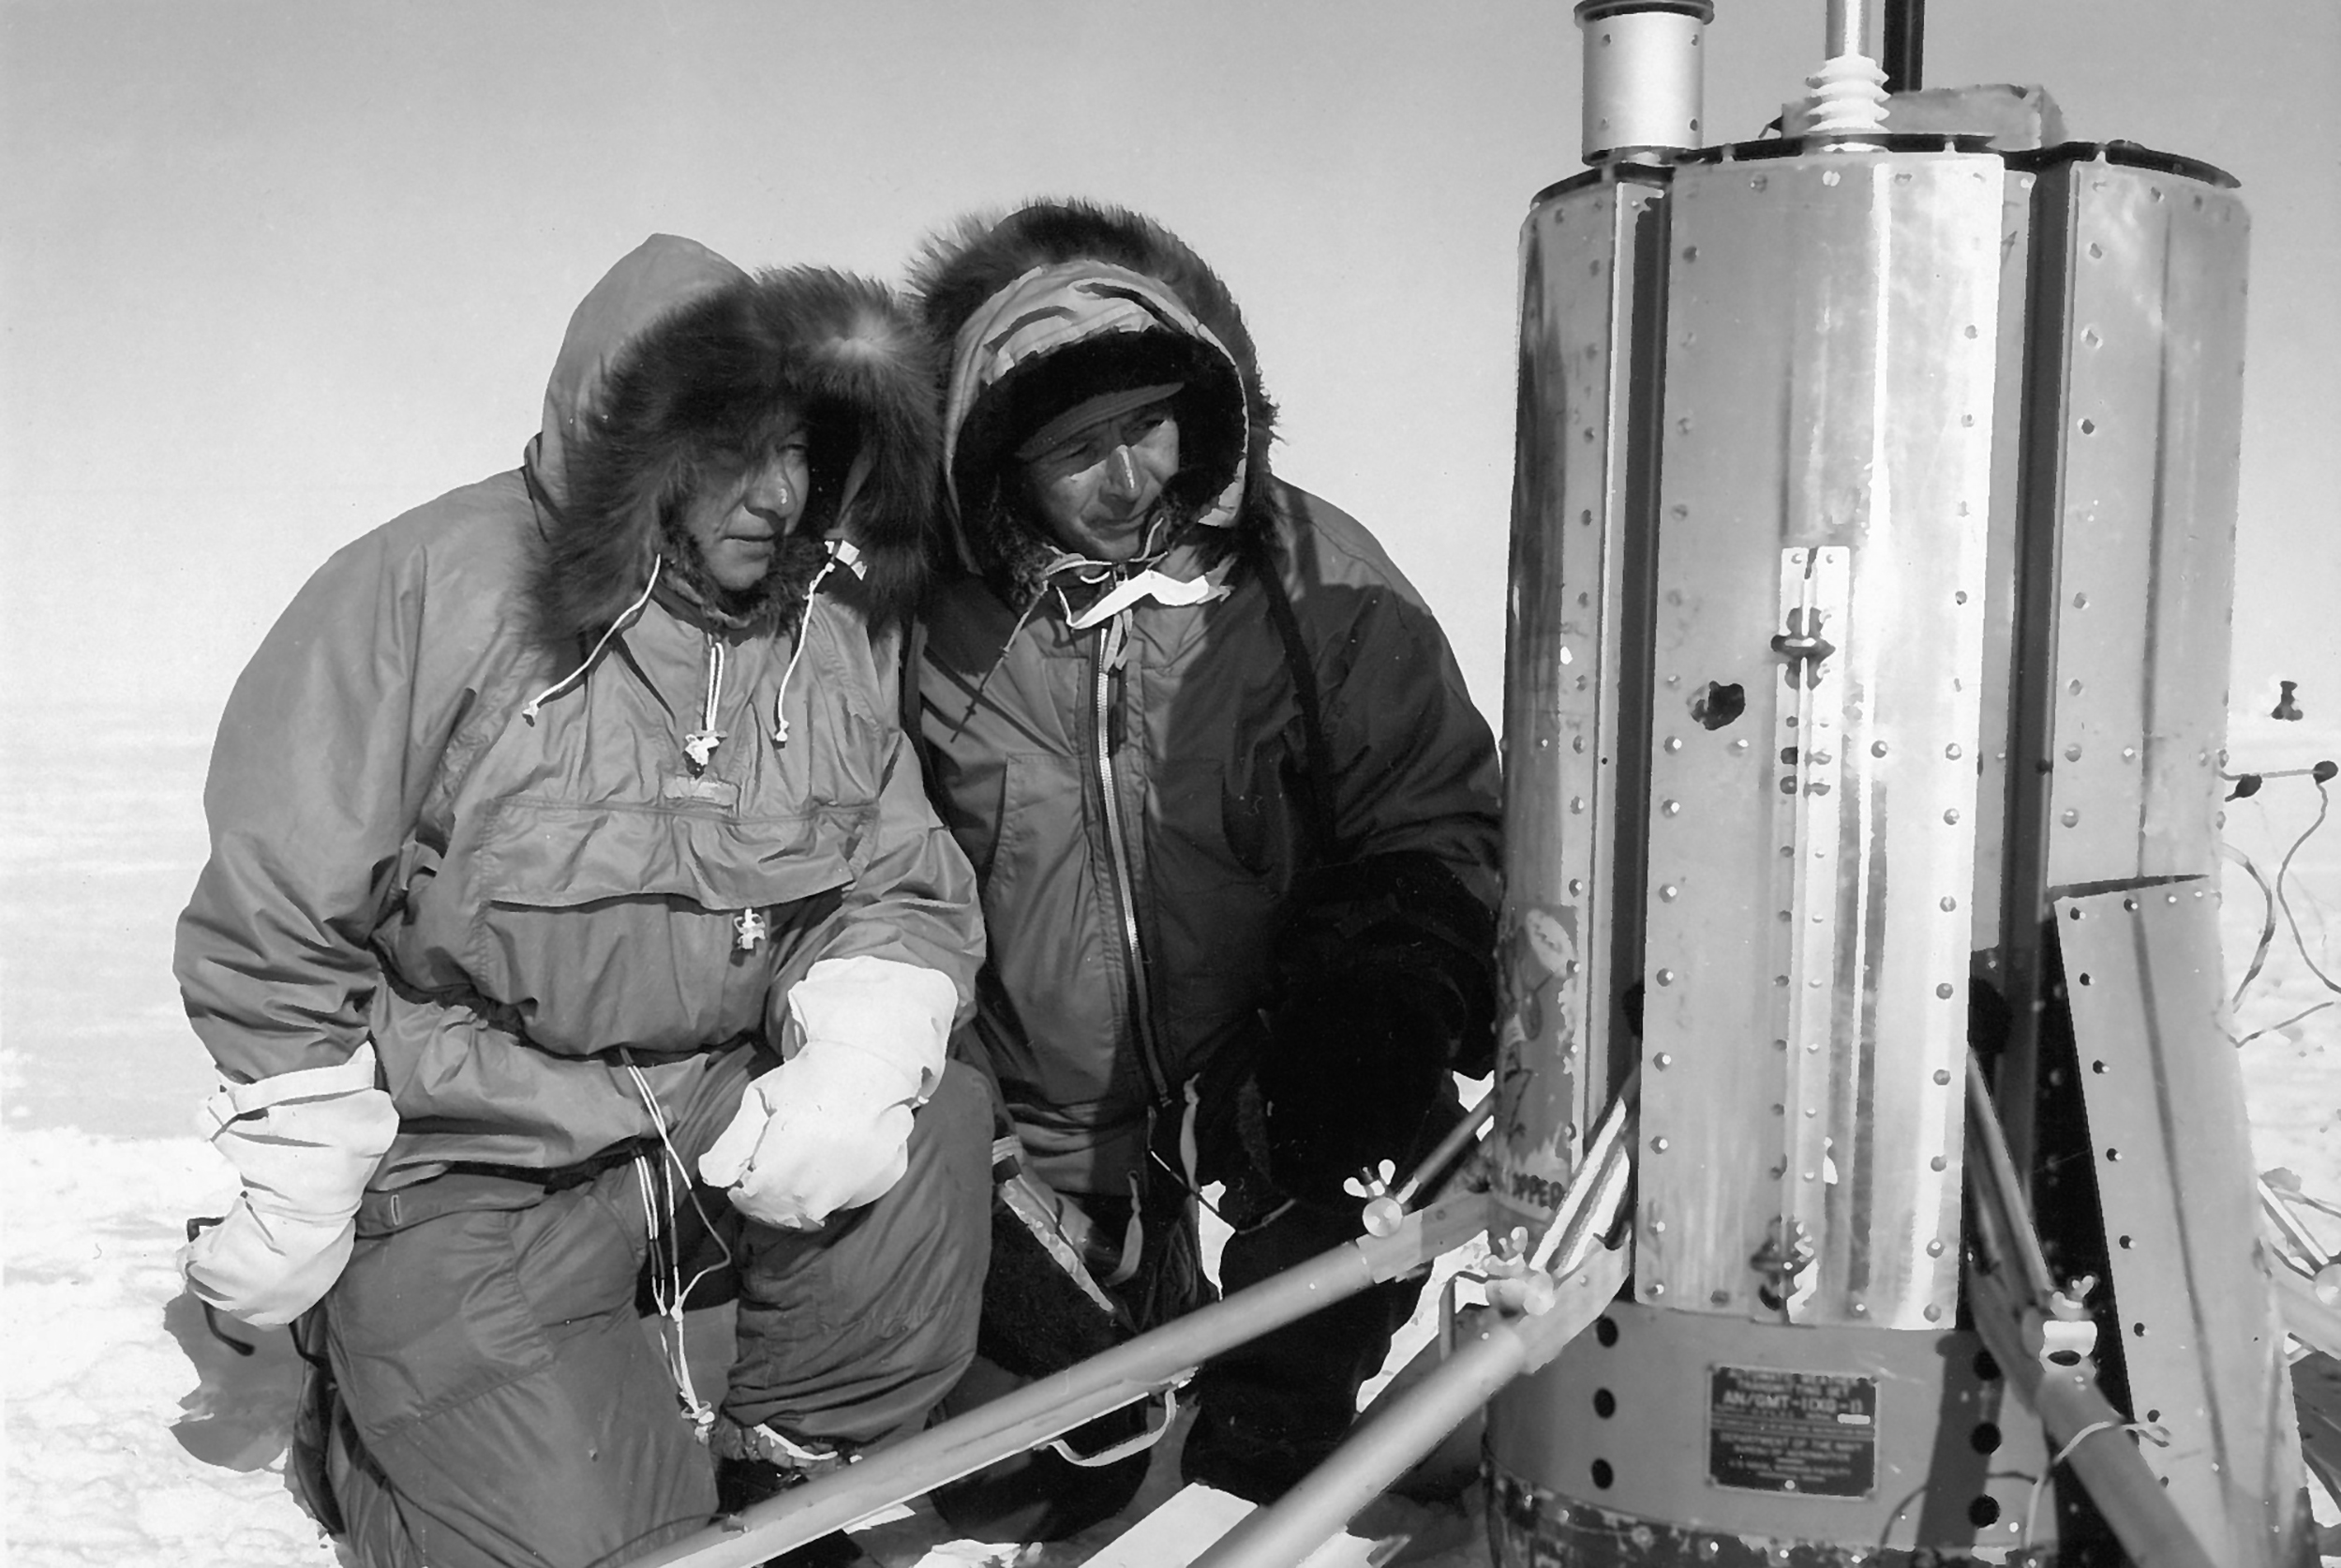 1960 photo of two people operating science equipment.
